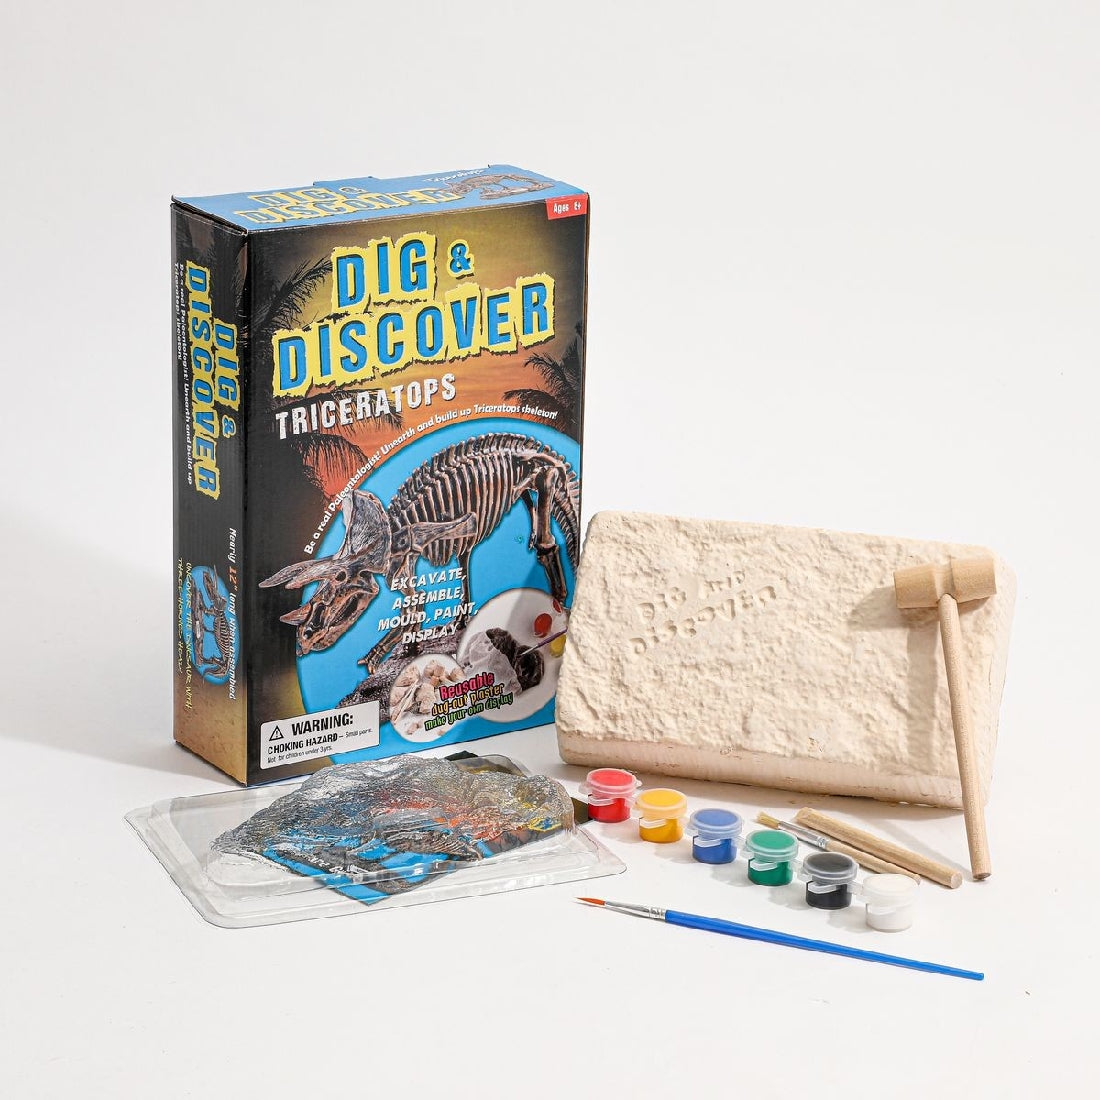 DIG & DISCOVER DINOSAUR - TRICERATOPS